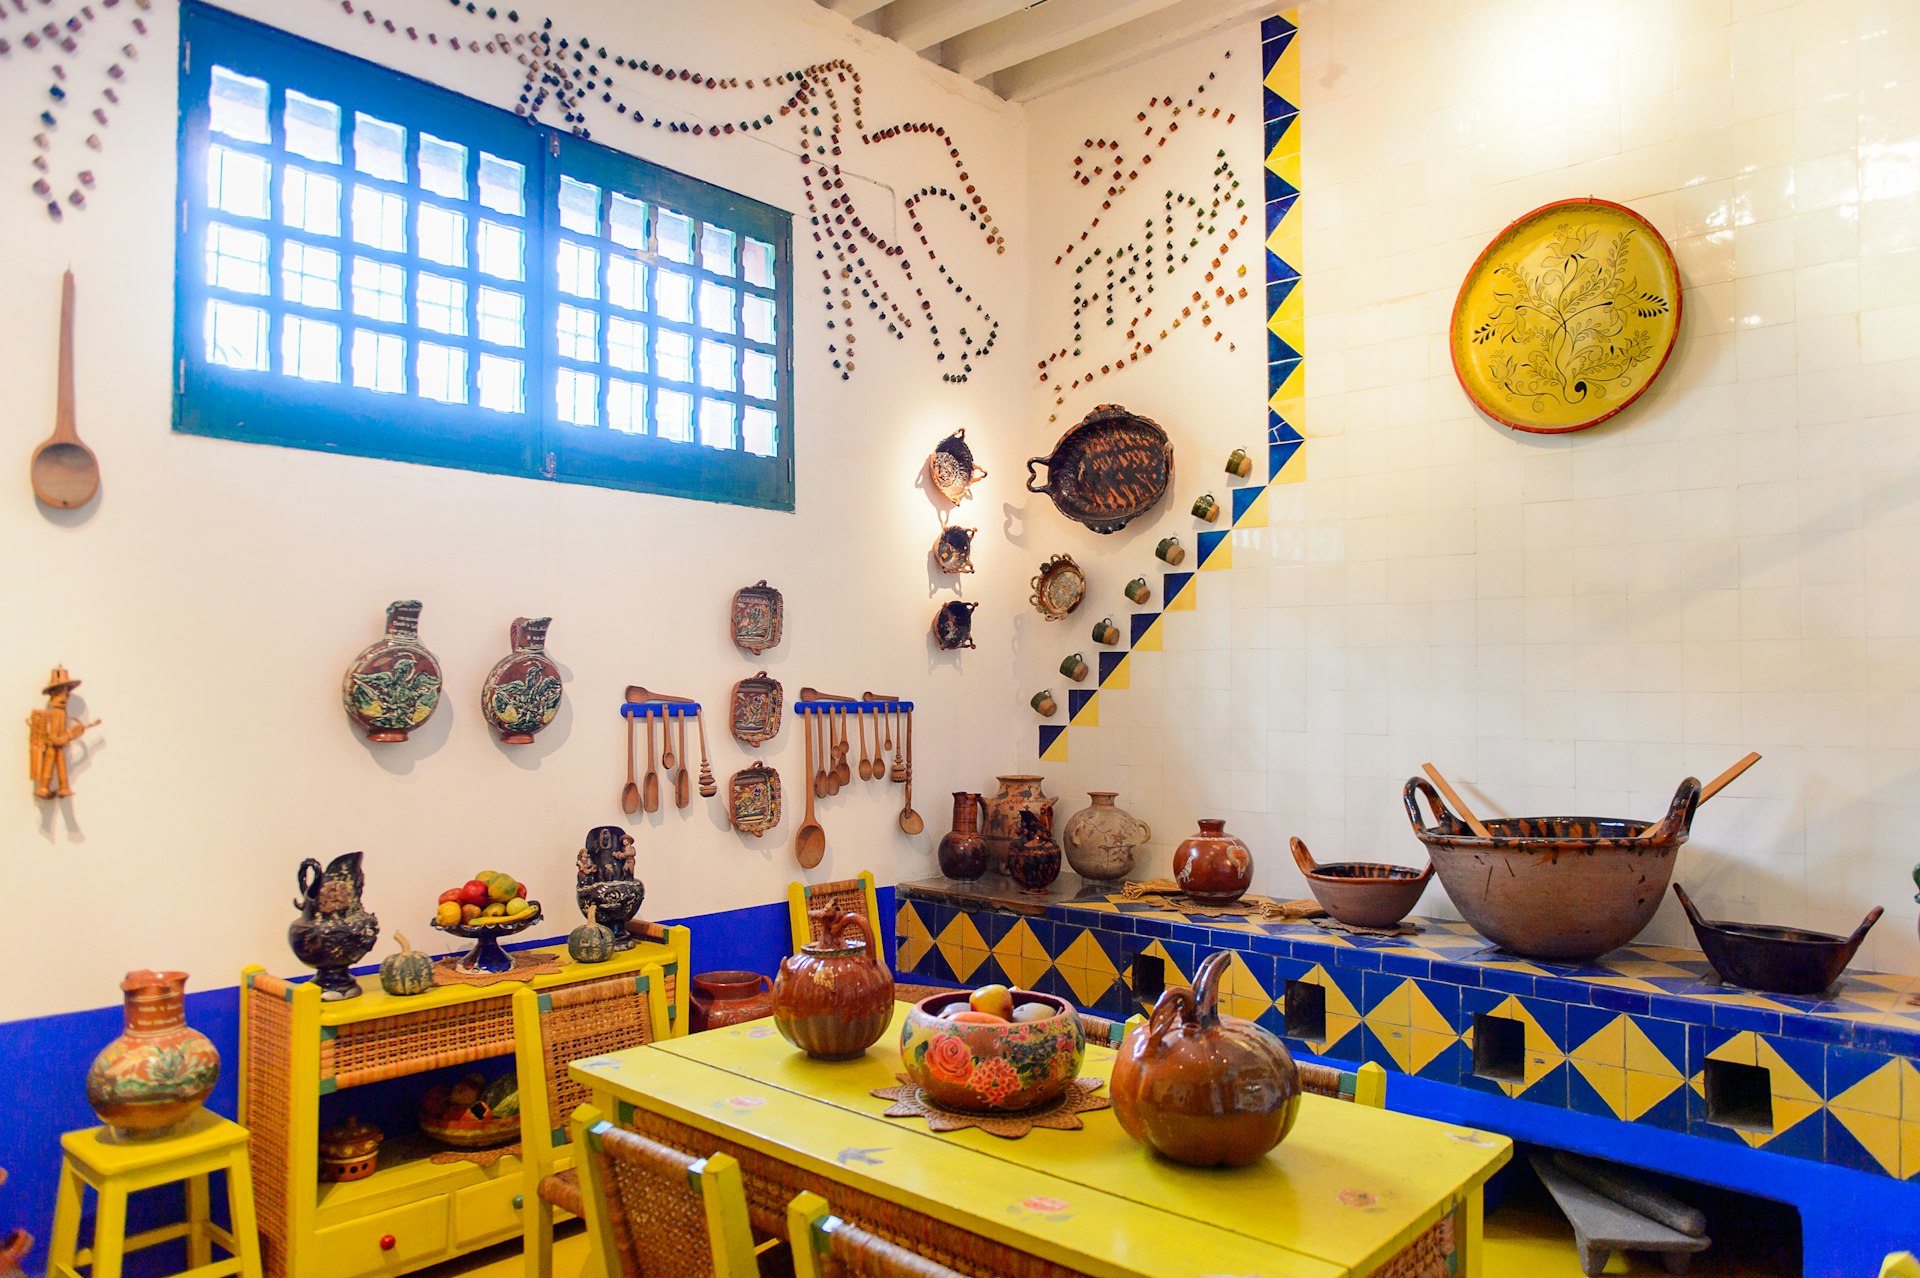 Kitchen in the Blue House (La Casa Azul), a historic house and art museum dedicated to the life and work of Mexican artist Frida Kahlo.